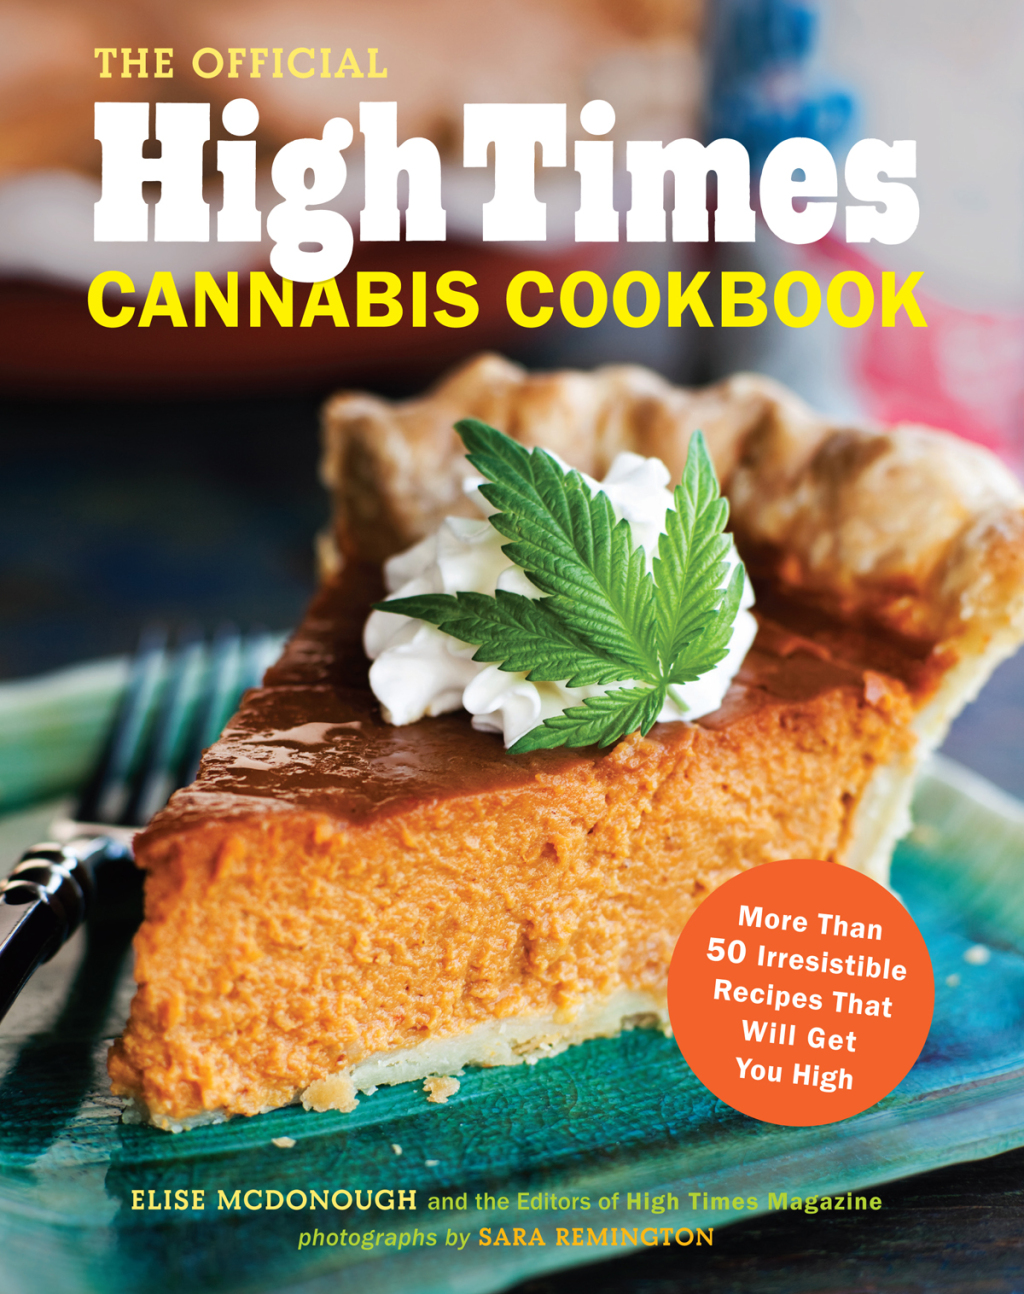 The Official High Times Cannabis Cookbook (eBook) - Elise McDonough; Editors of High Times Magazine,